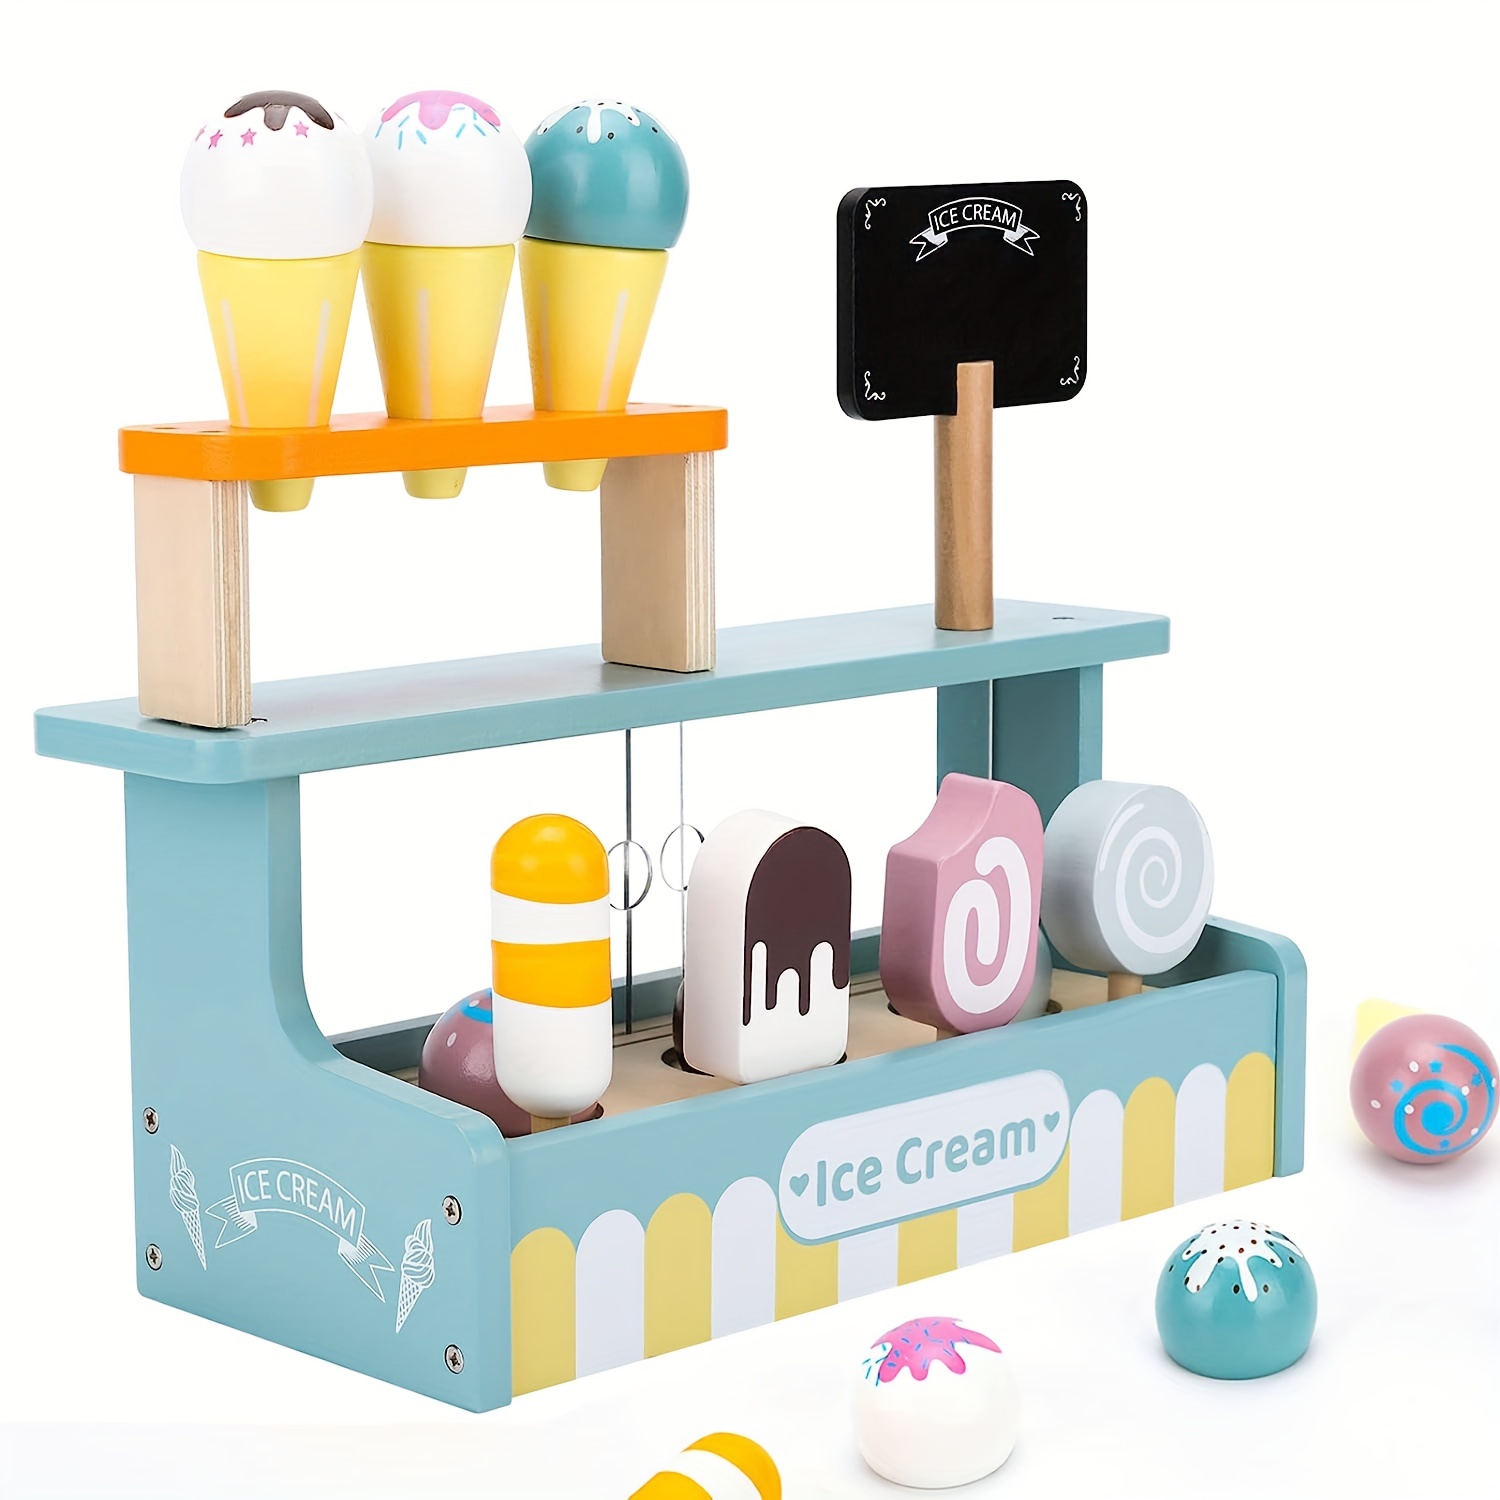 

Ice Cream Toy, Wooden Ice Cream Counter Play Set For Kids, Pretend Play Kitchen Food Toy Gift For 2 3 4 5 6 Boys Girls Christmas, Halloween, Thanksgiving Gifts